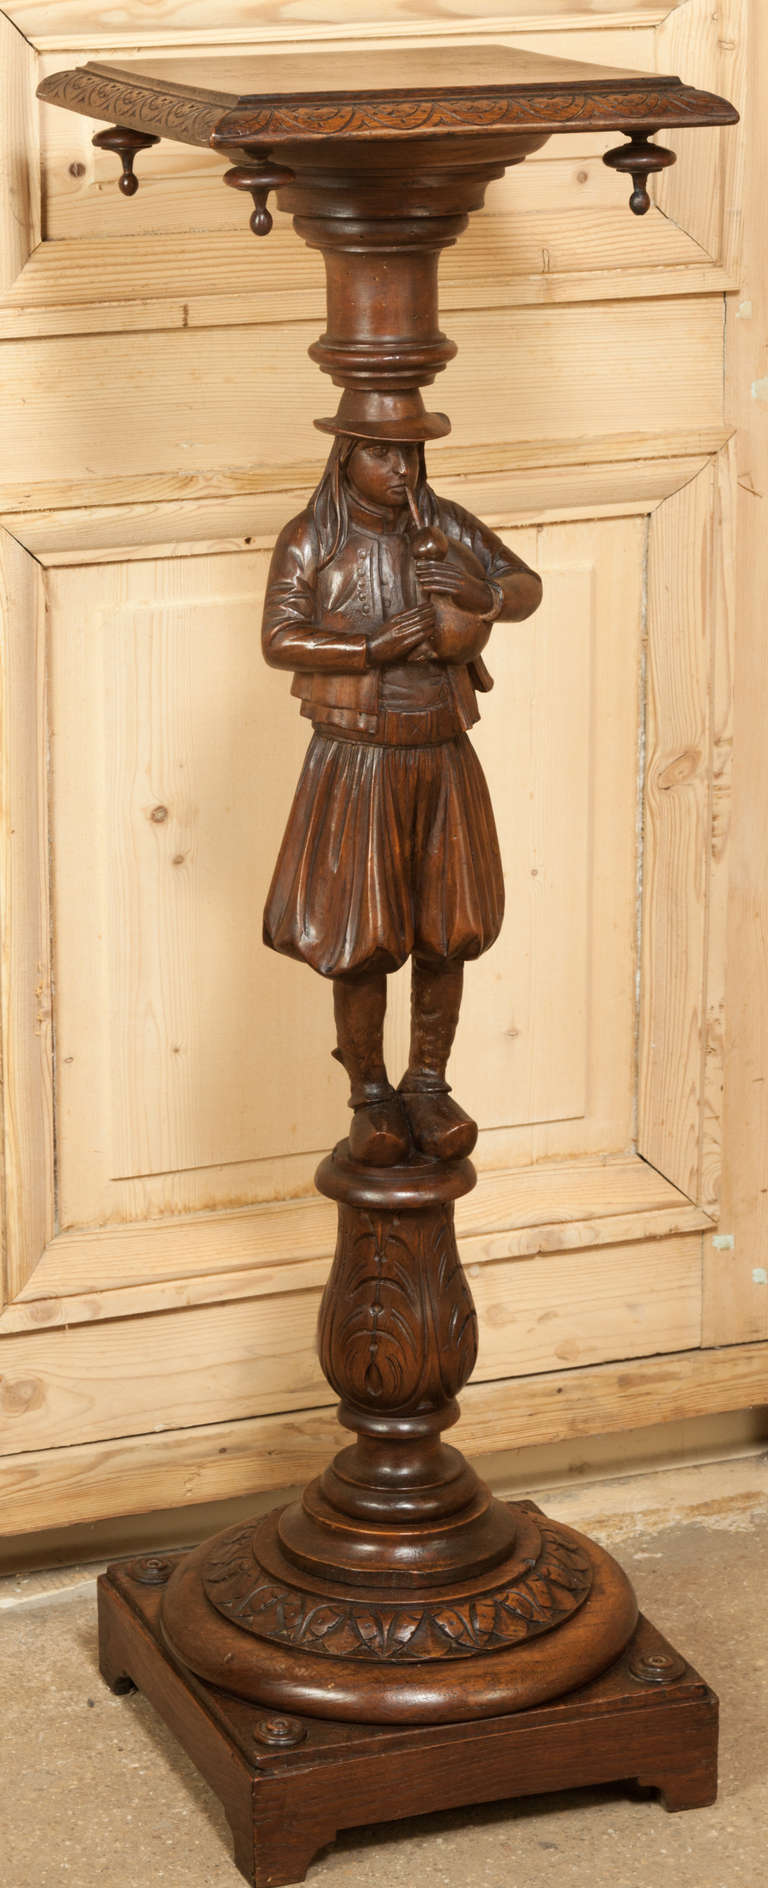 Always a favorite, the whimsical nature of carved wood antiques from Brittany bring smiles to everyone's faces.  This Antique Brittany Pedestal features a finely dressed young bagpipper atop a finely carved pediment and base.  Even the top surface